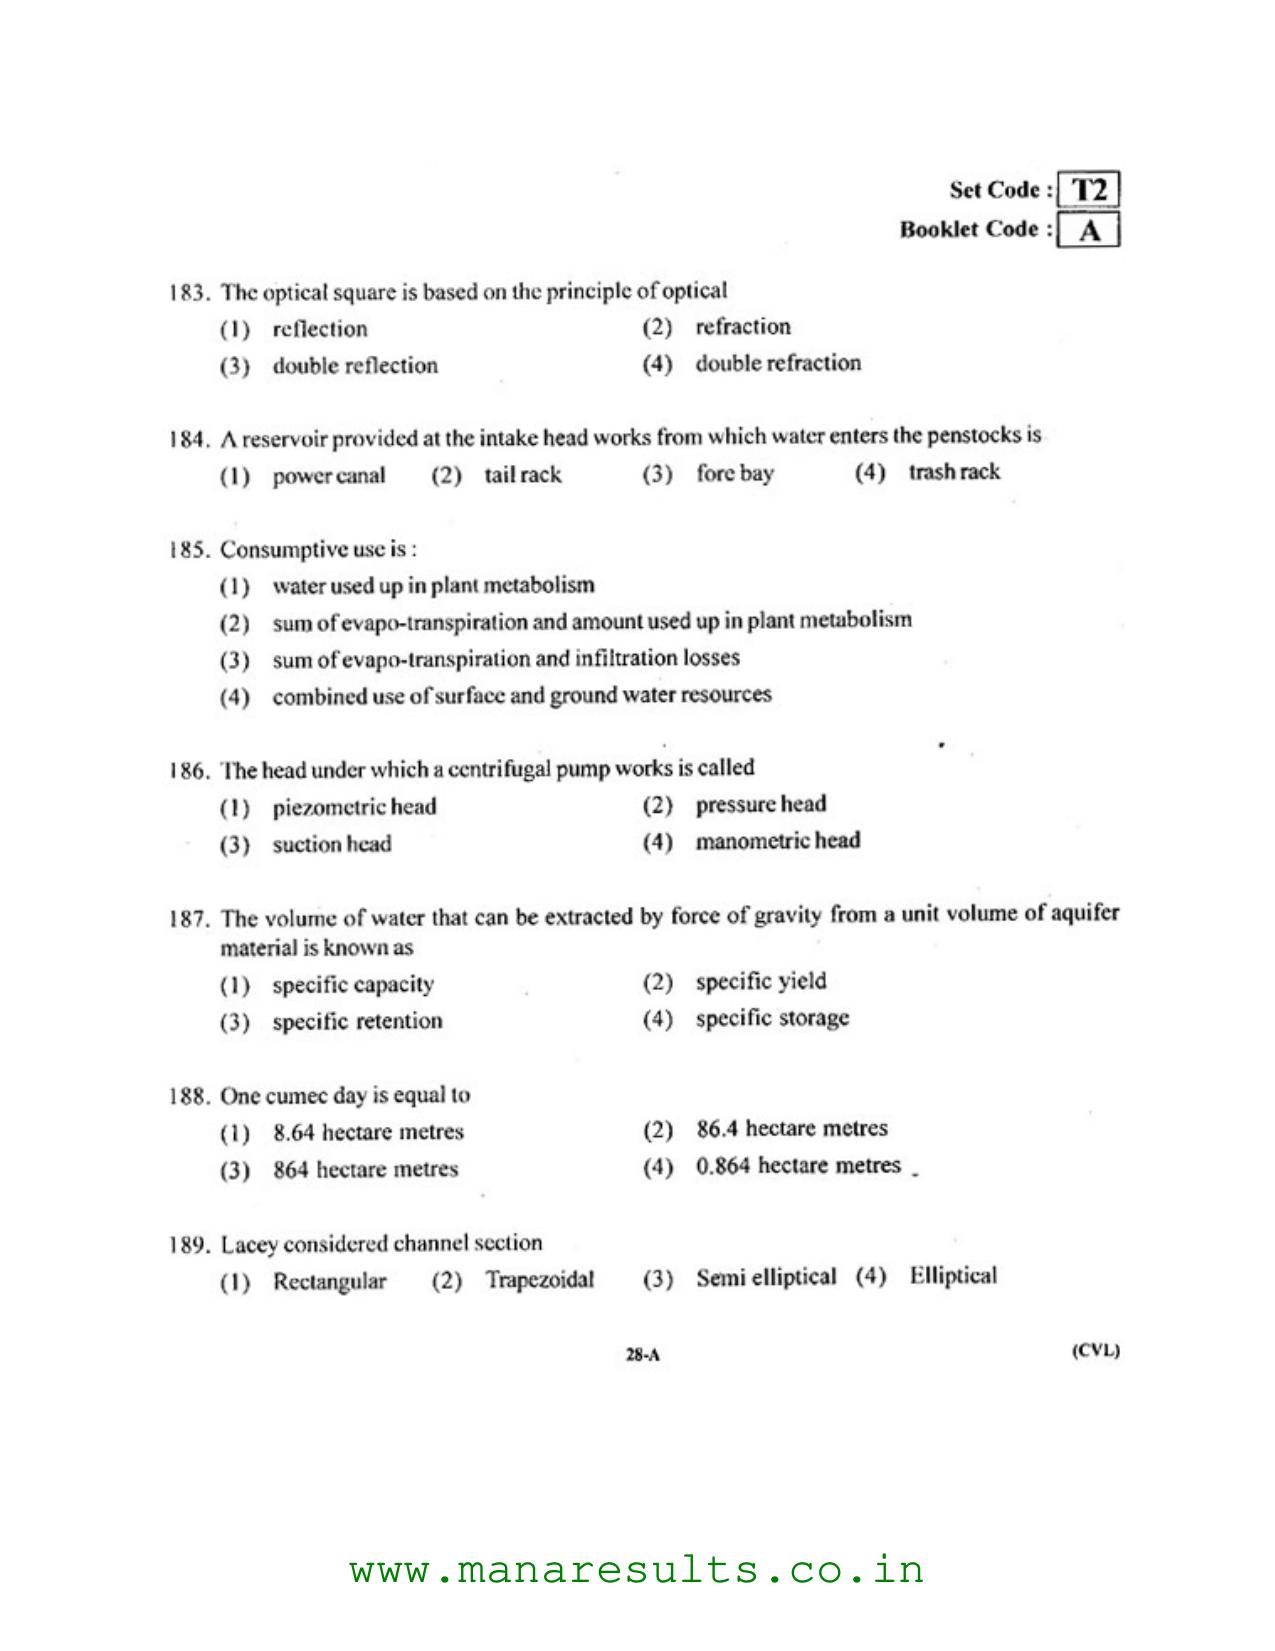 AP ECET 2016 Civil Engineering Old Previous Question Papers - Page 27